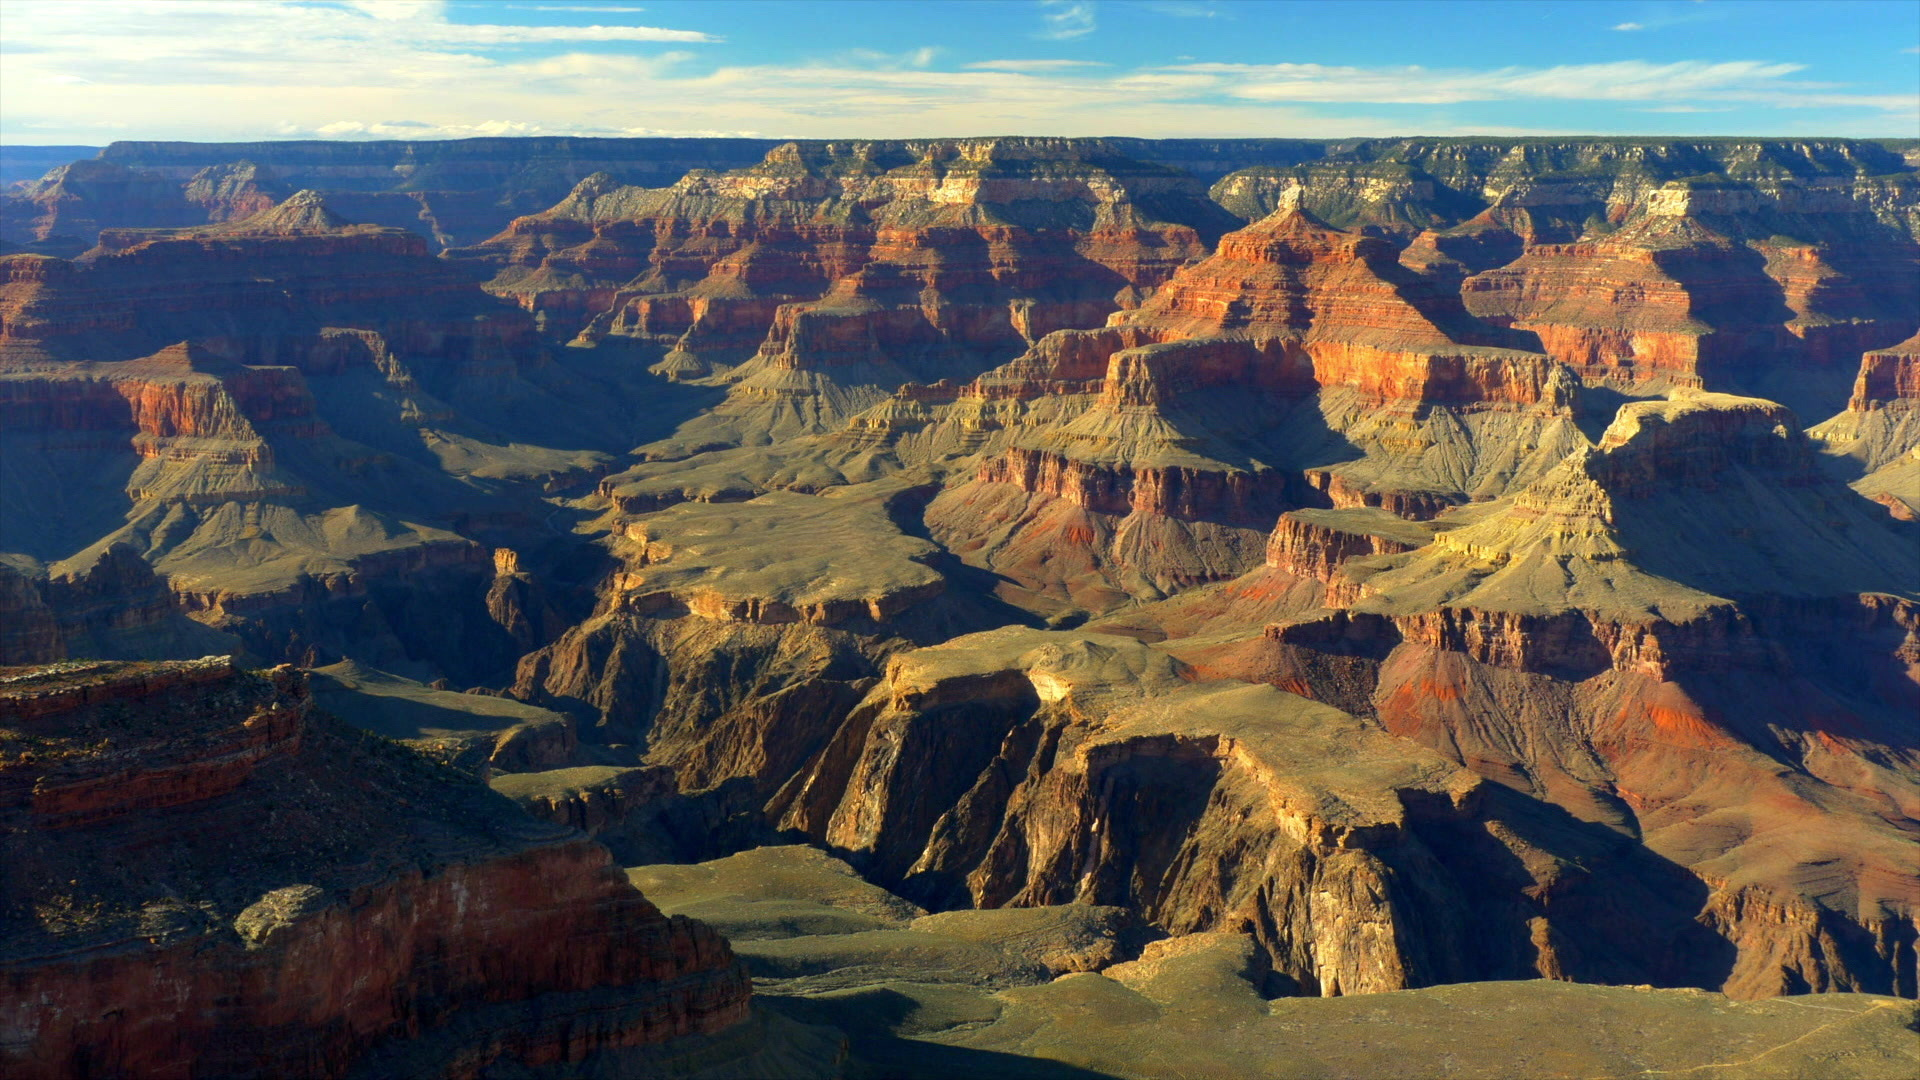 Watch　Morning:　National　Canyon　Full　Park　Sunday　CBS　Nature:　Grand　show　on